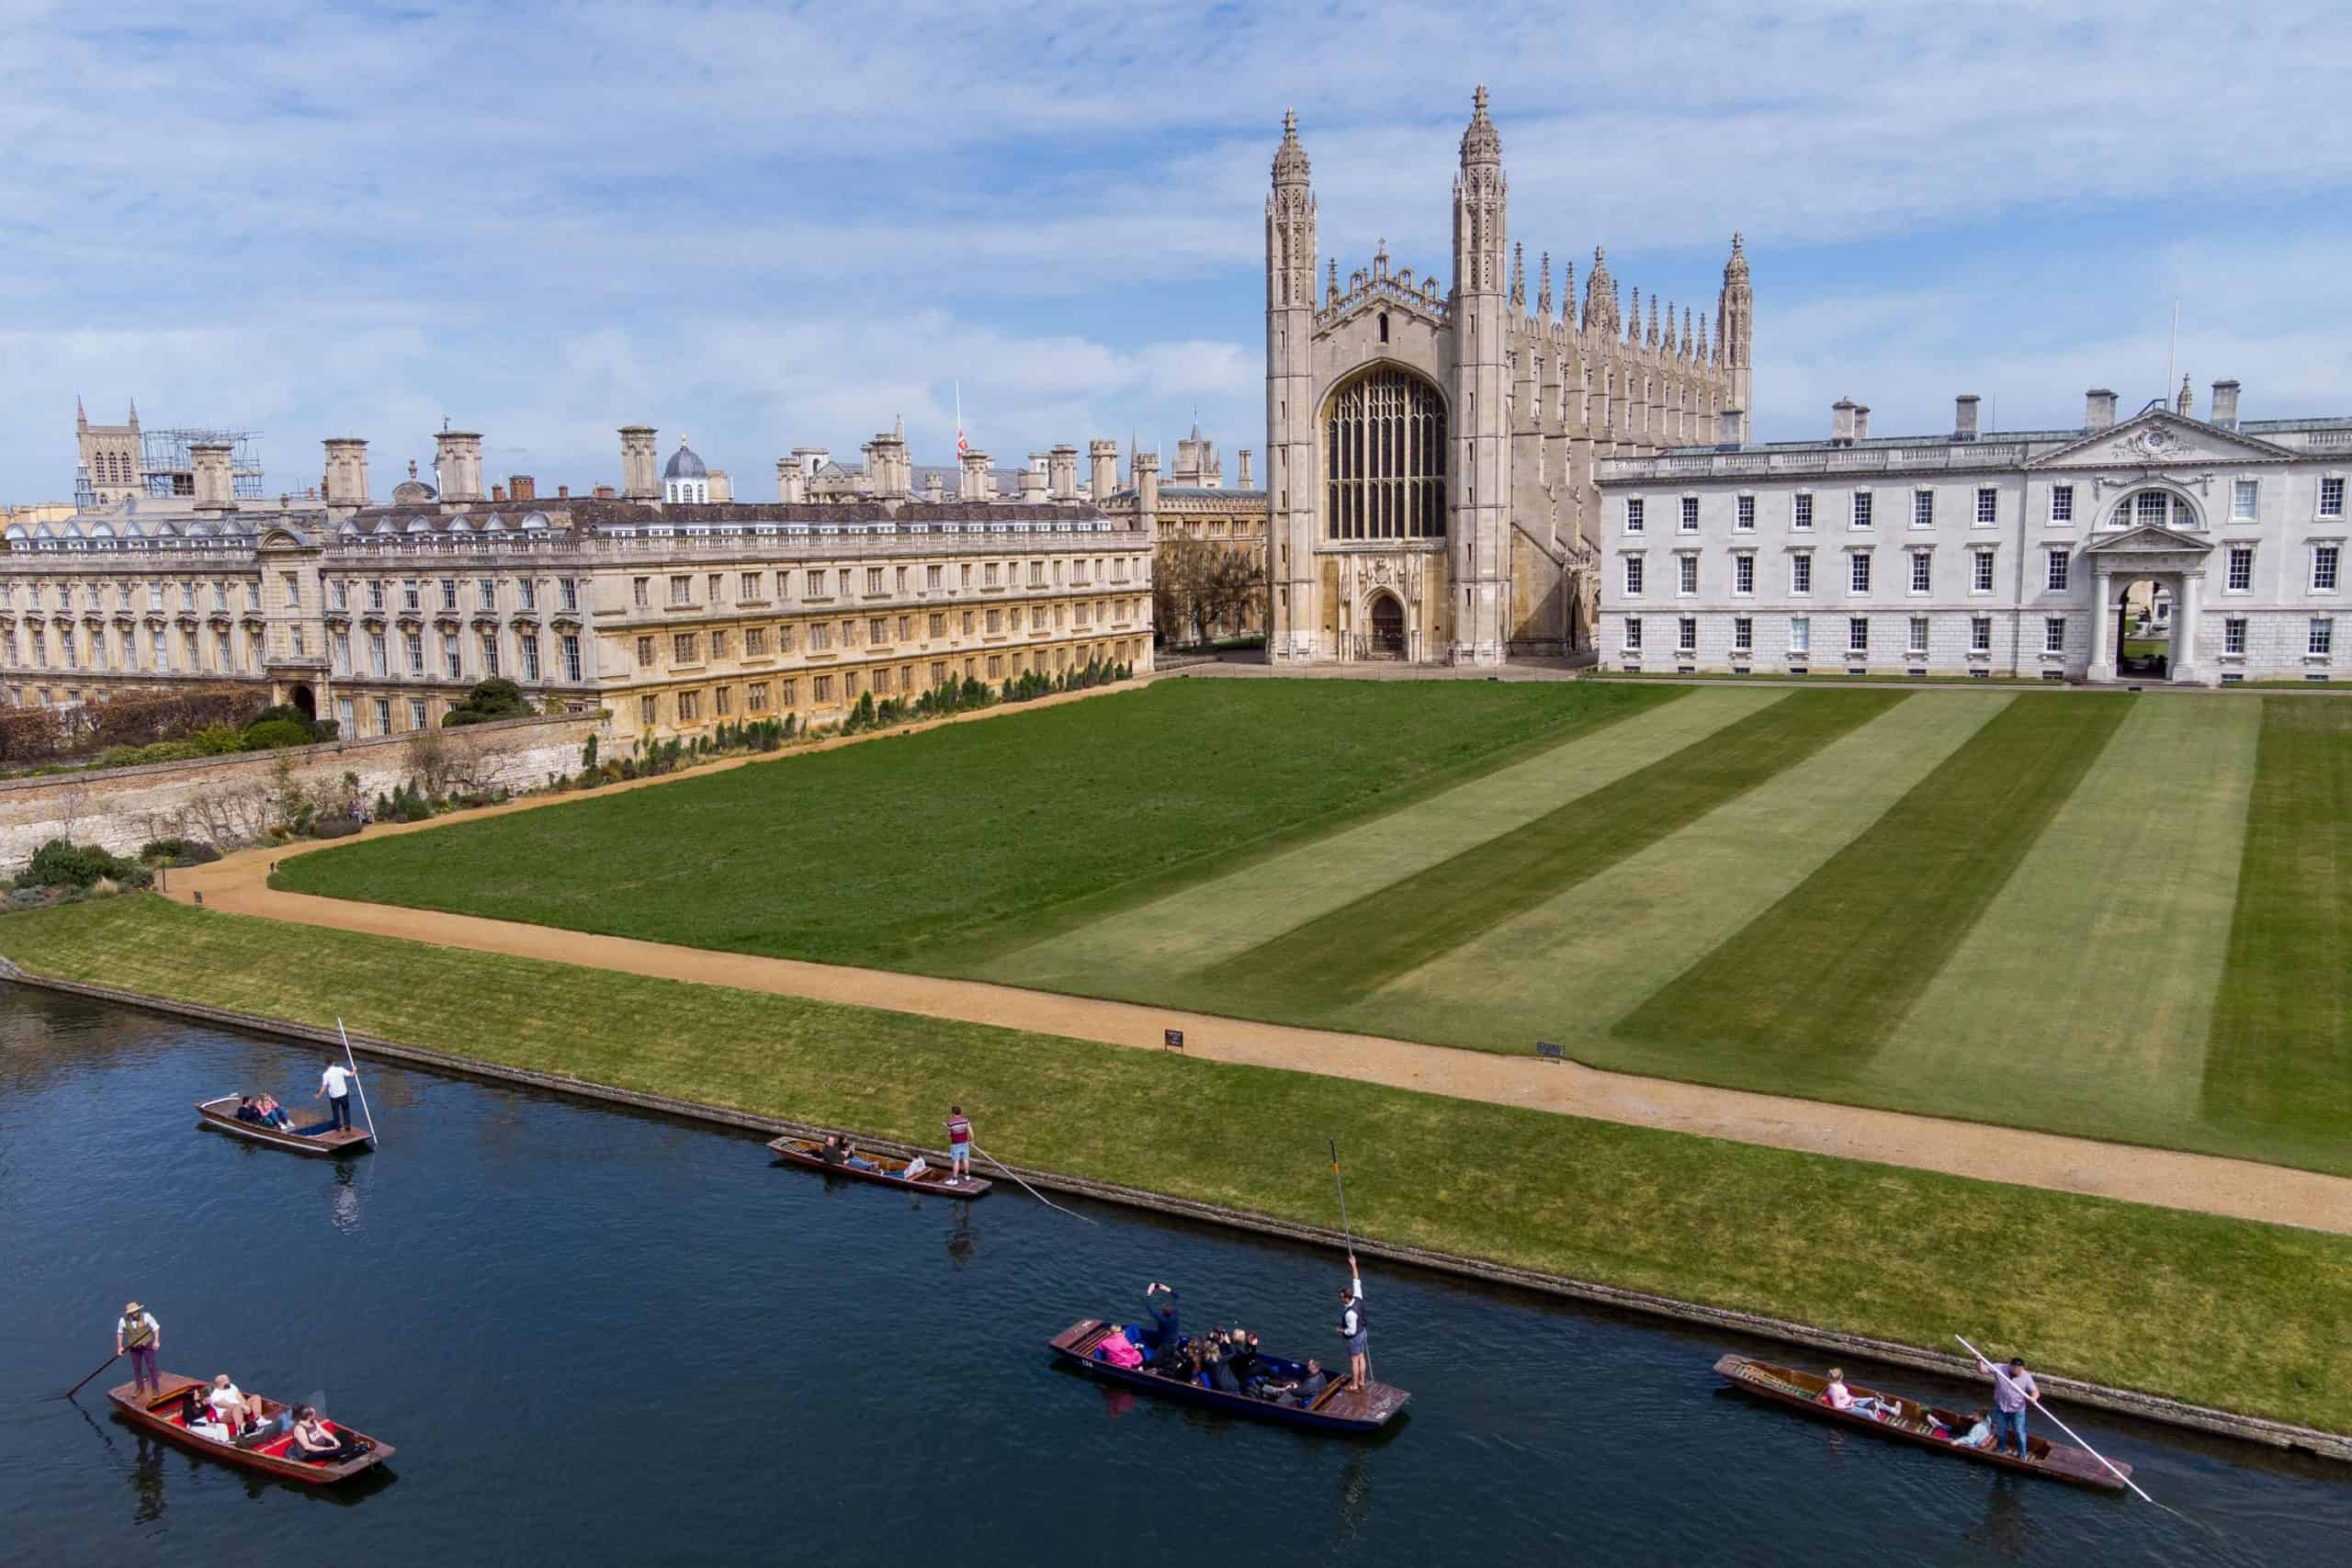 Times columnist says we are ‘hurting Oxbridge’ in the name of equality